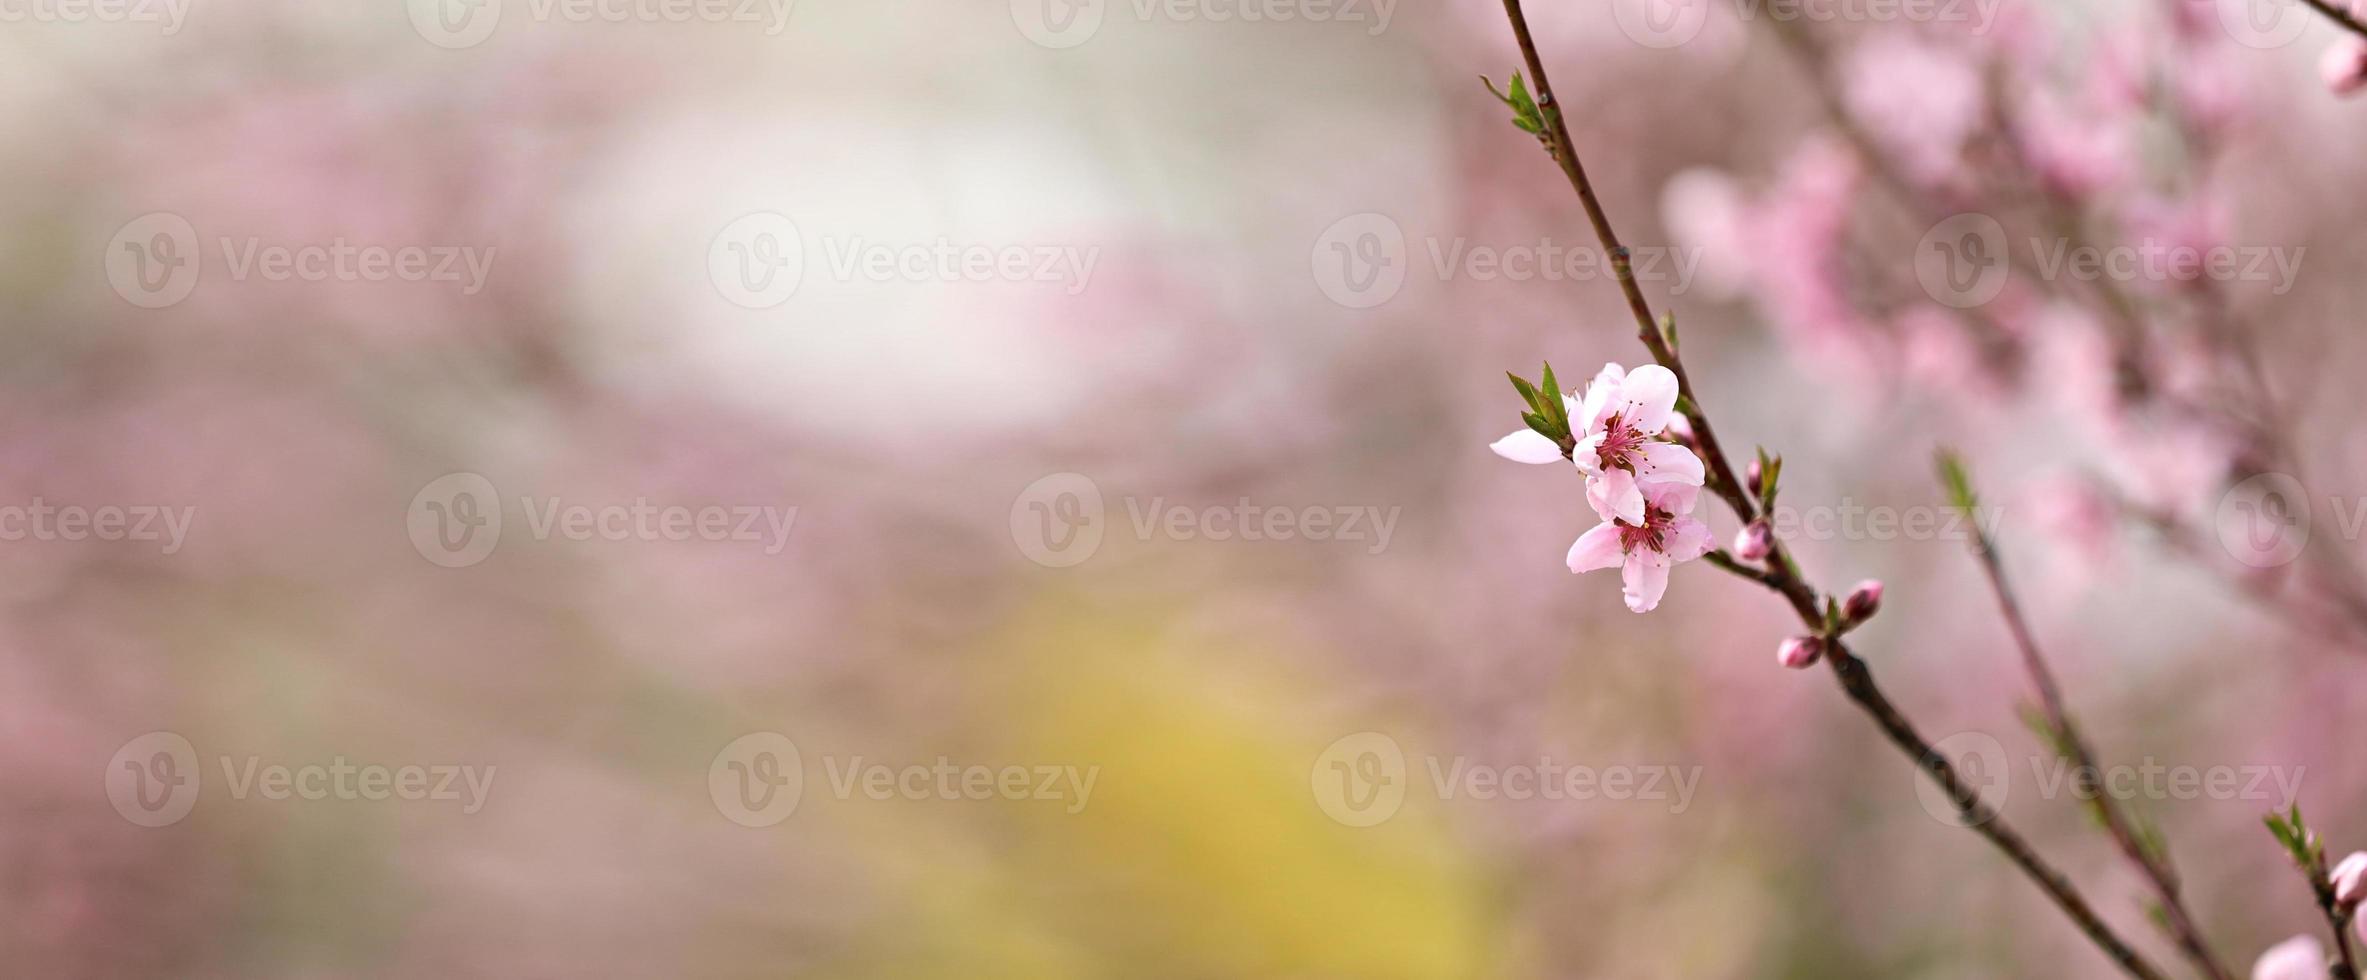 Pink peach flower blossoms in spring season. Beautiful peach blossoms sway in the wind. Beautiful bright pink blooming peach flowers on the branches. Closeup photo